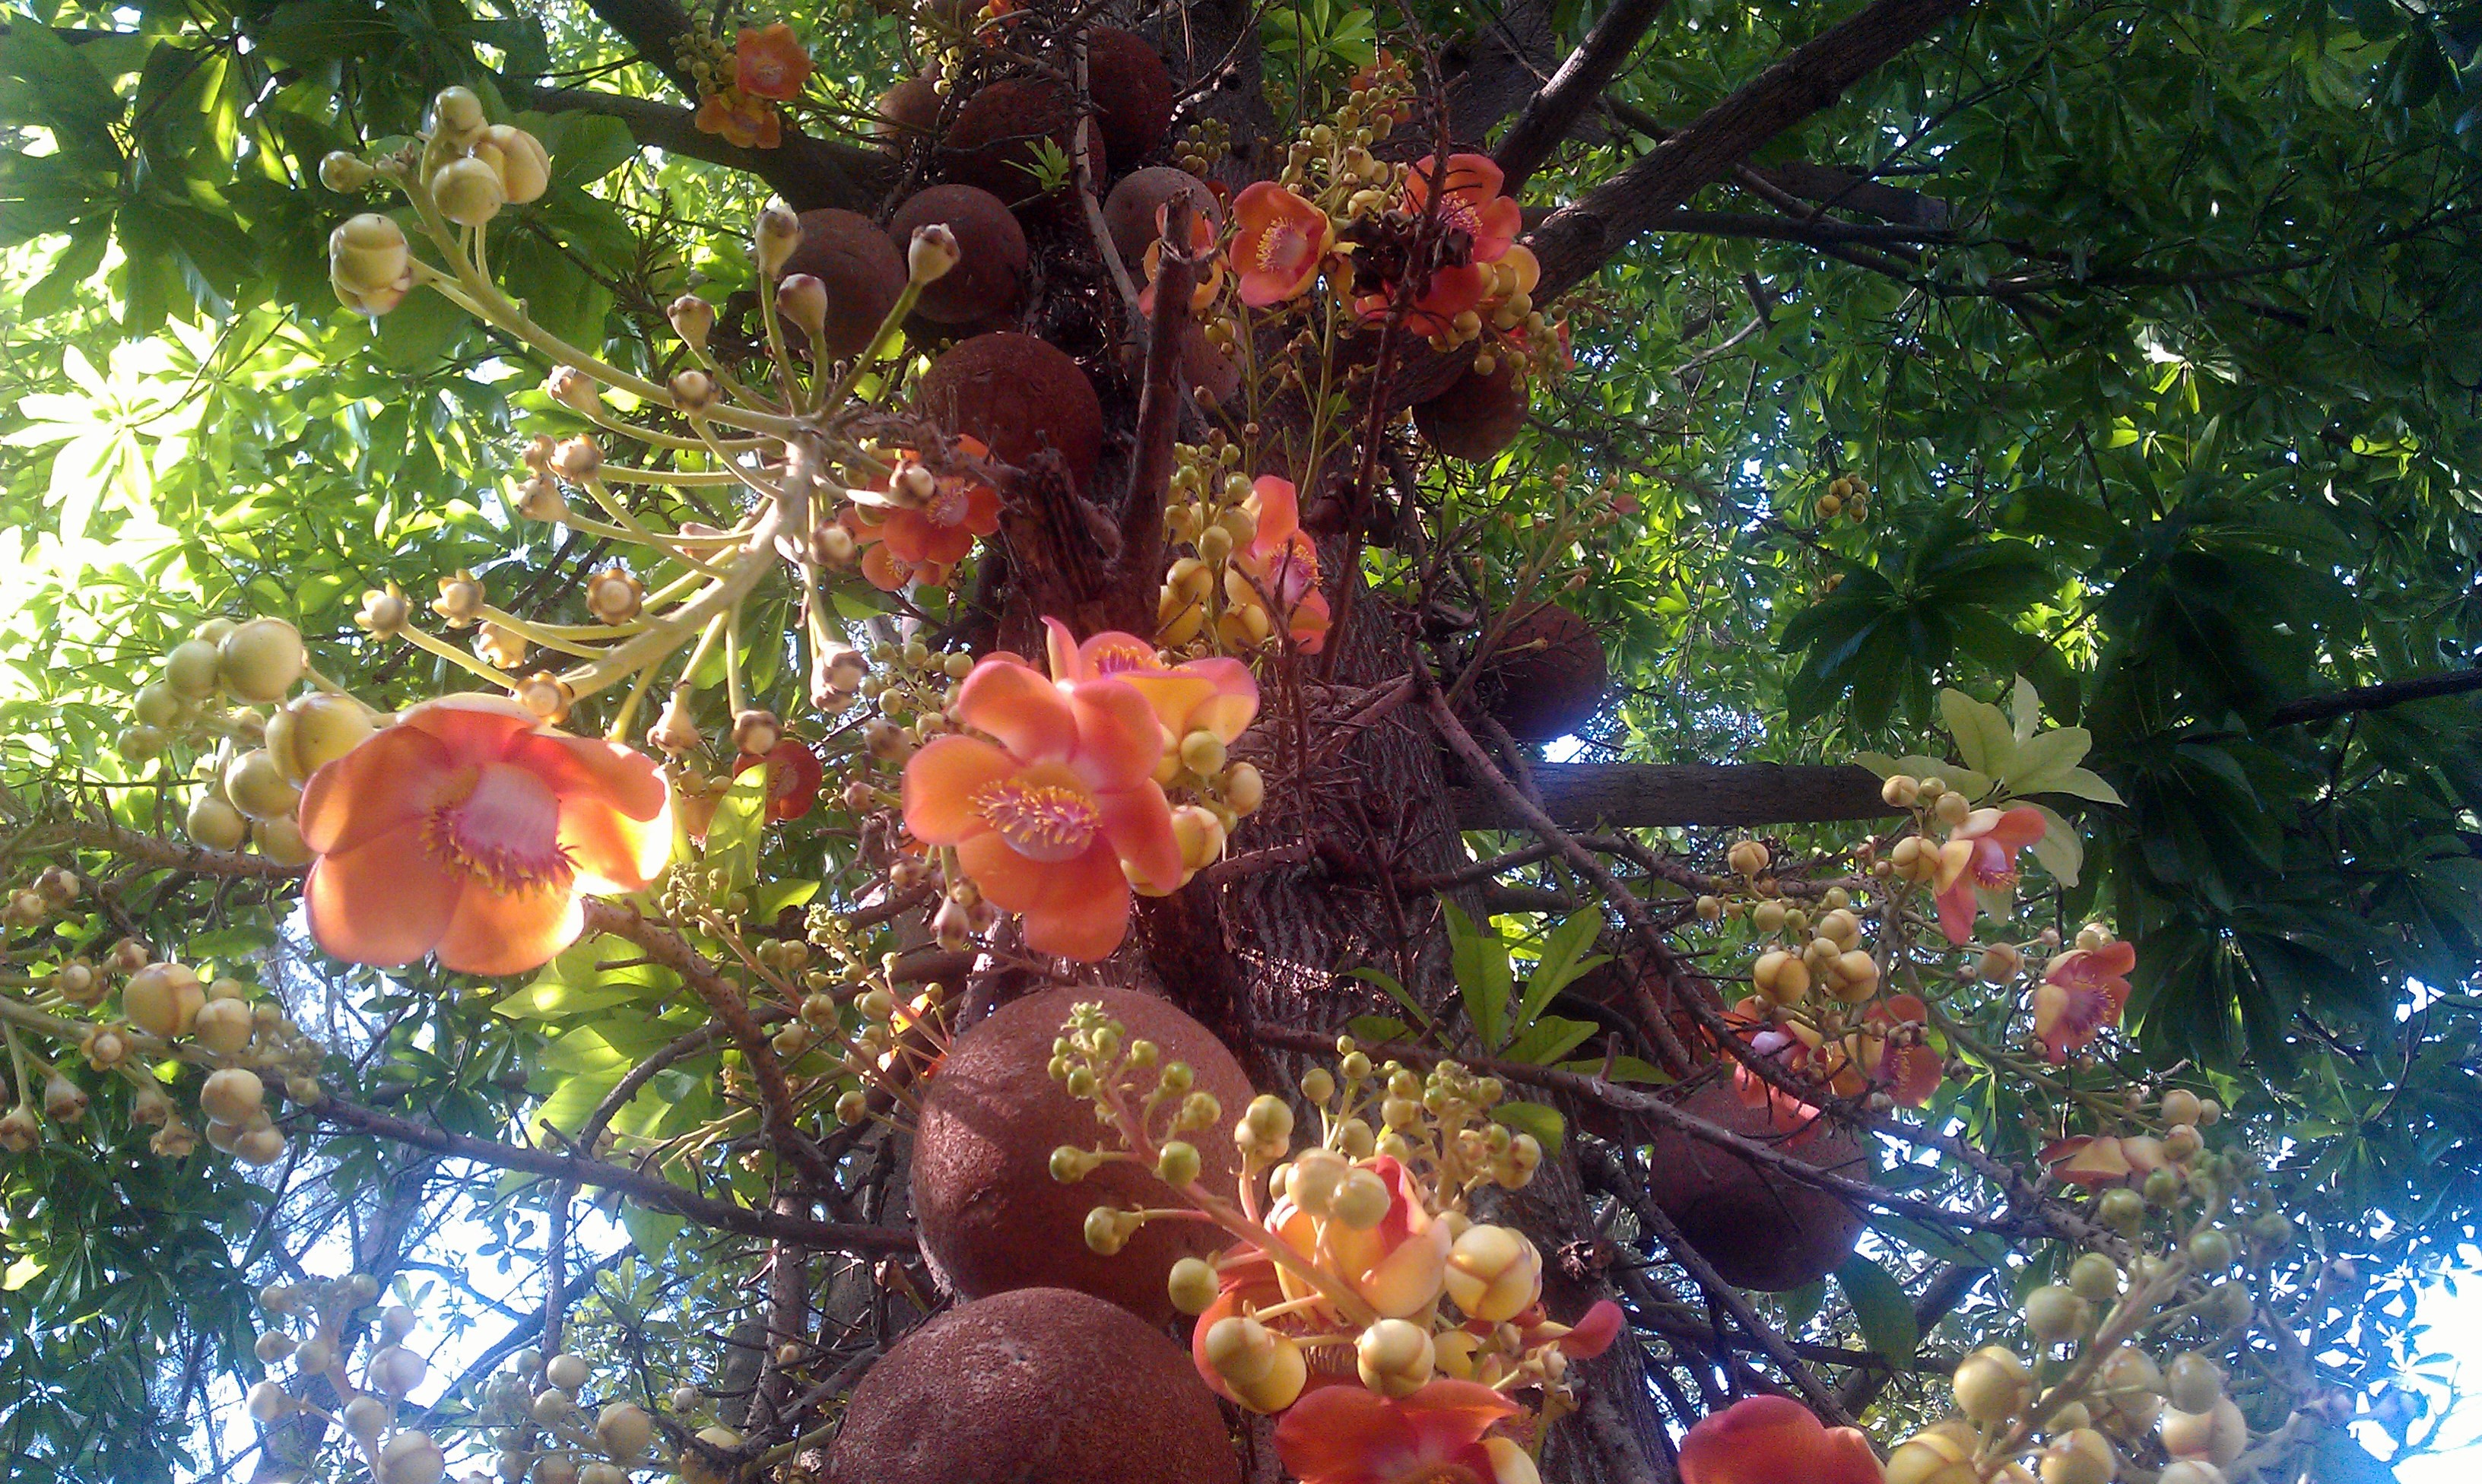 Cannonball tree – Free Thoughts by Ranjit Singh